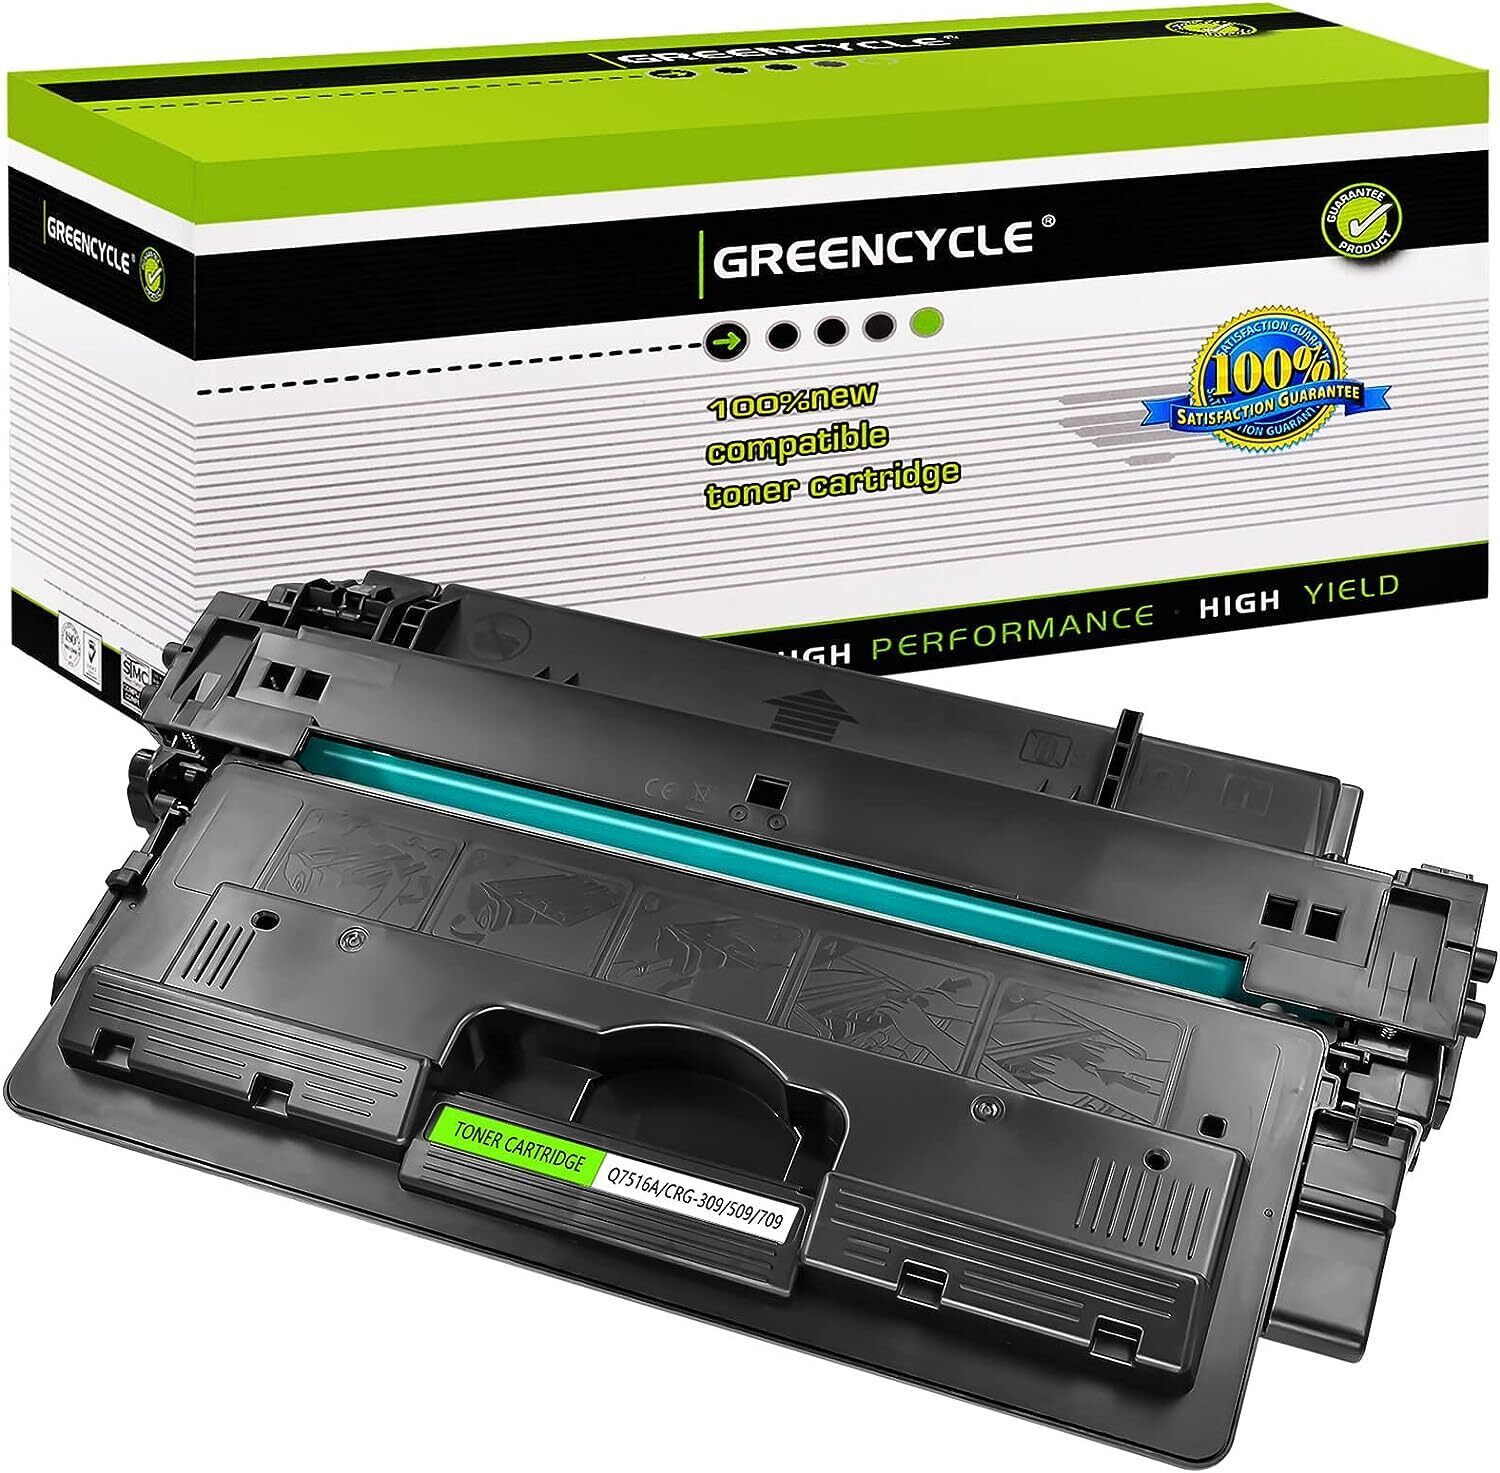  1PK Greencycle High Yield Toner 16A Q7516A Compatible for HP LaserJet 5200TN